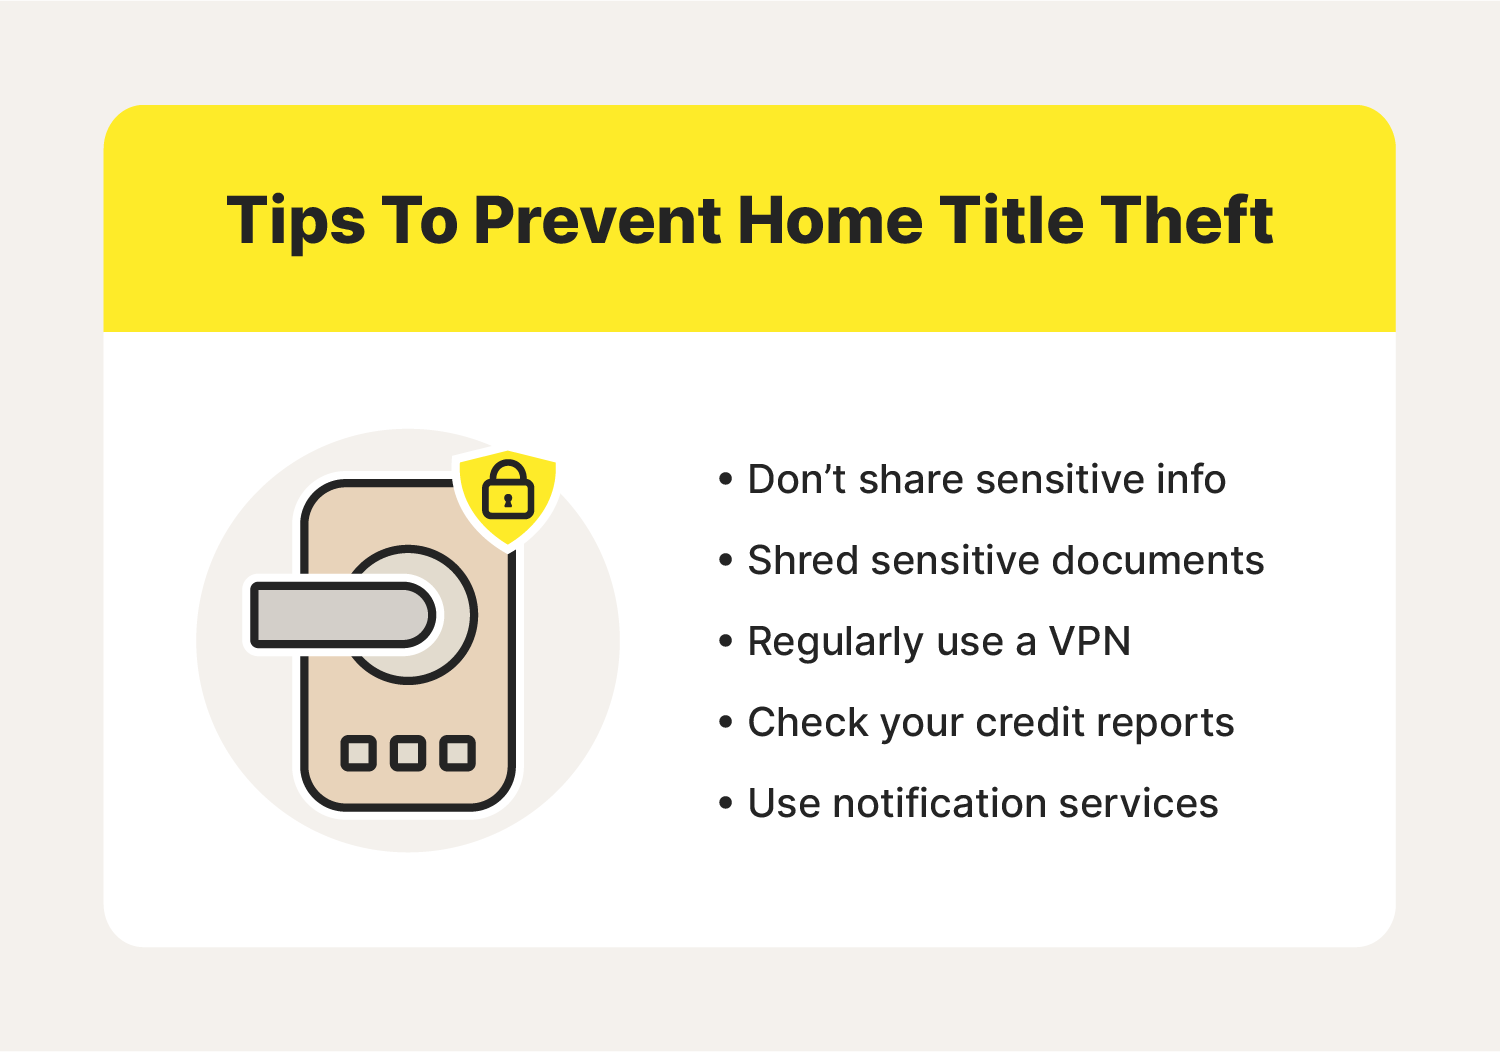 An infographic showcases tips you can follow to help avoid home title theft.